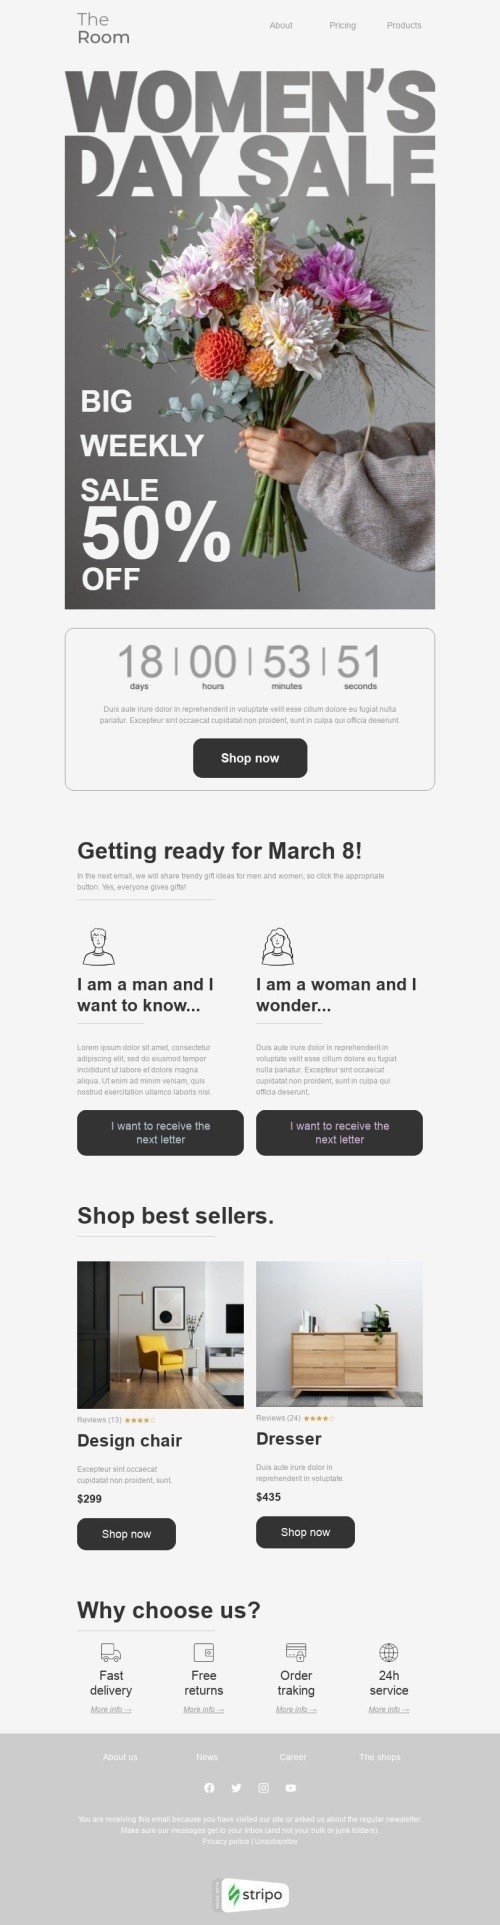 Women's Day Email Template "Big weekly sale" for Furniture, Interior & DIY industry desktop view